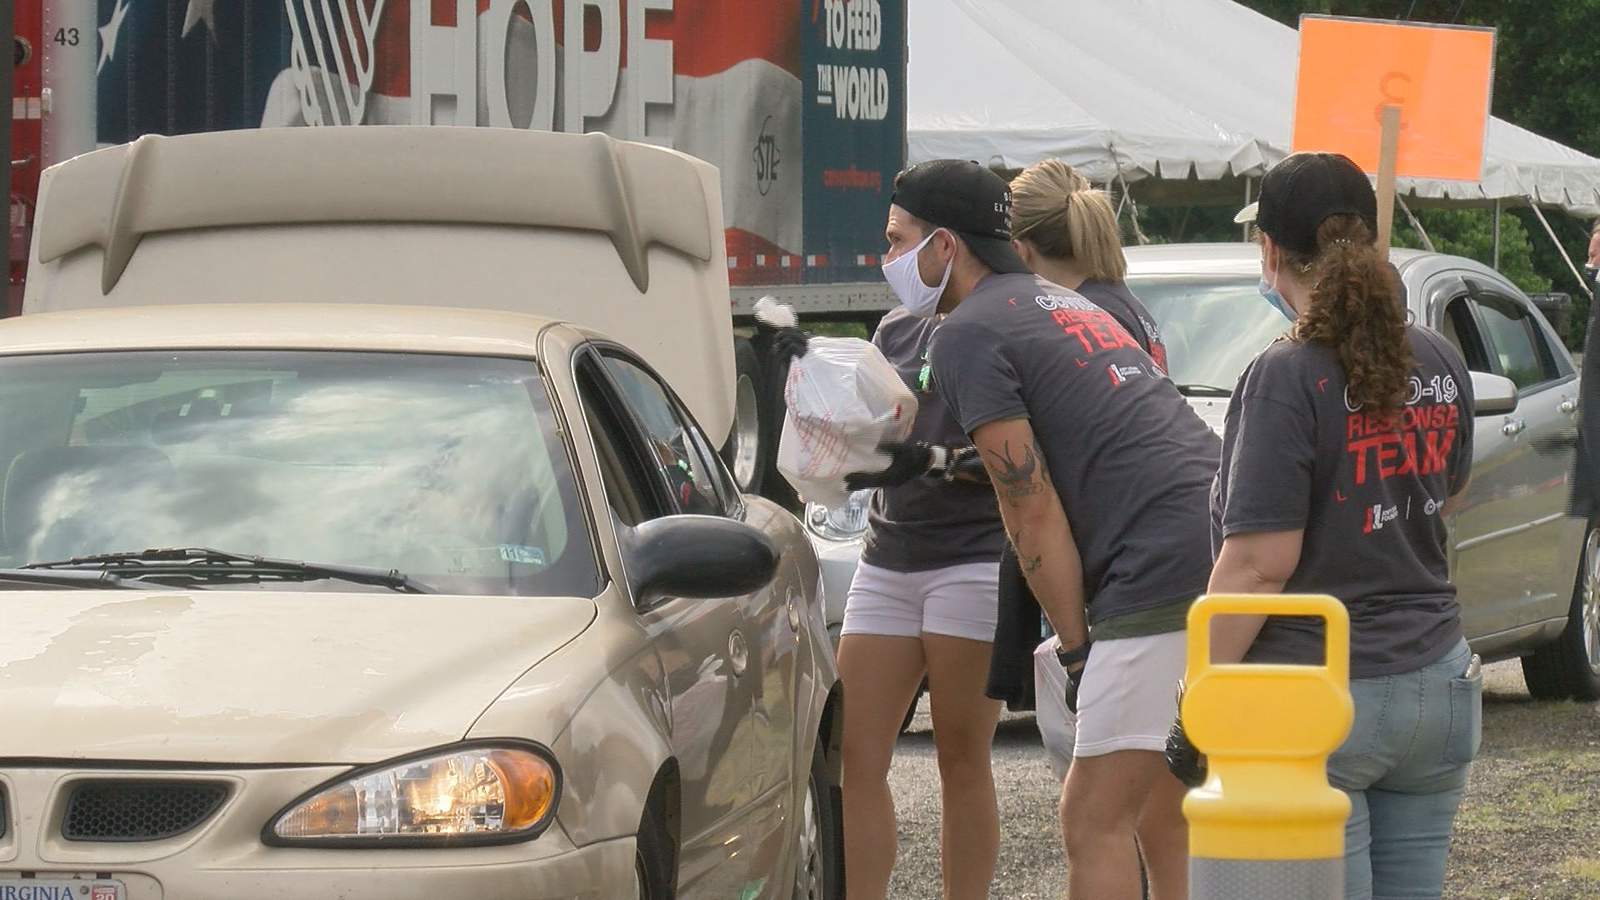 Organizations distribute food, hygiene supplies at Martinsville Speedway to those in need